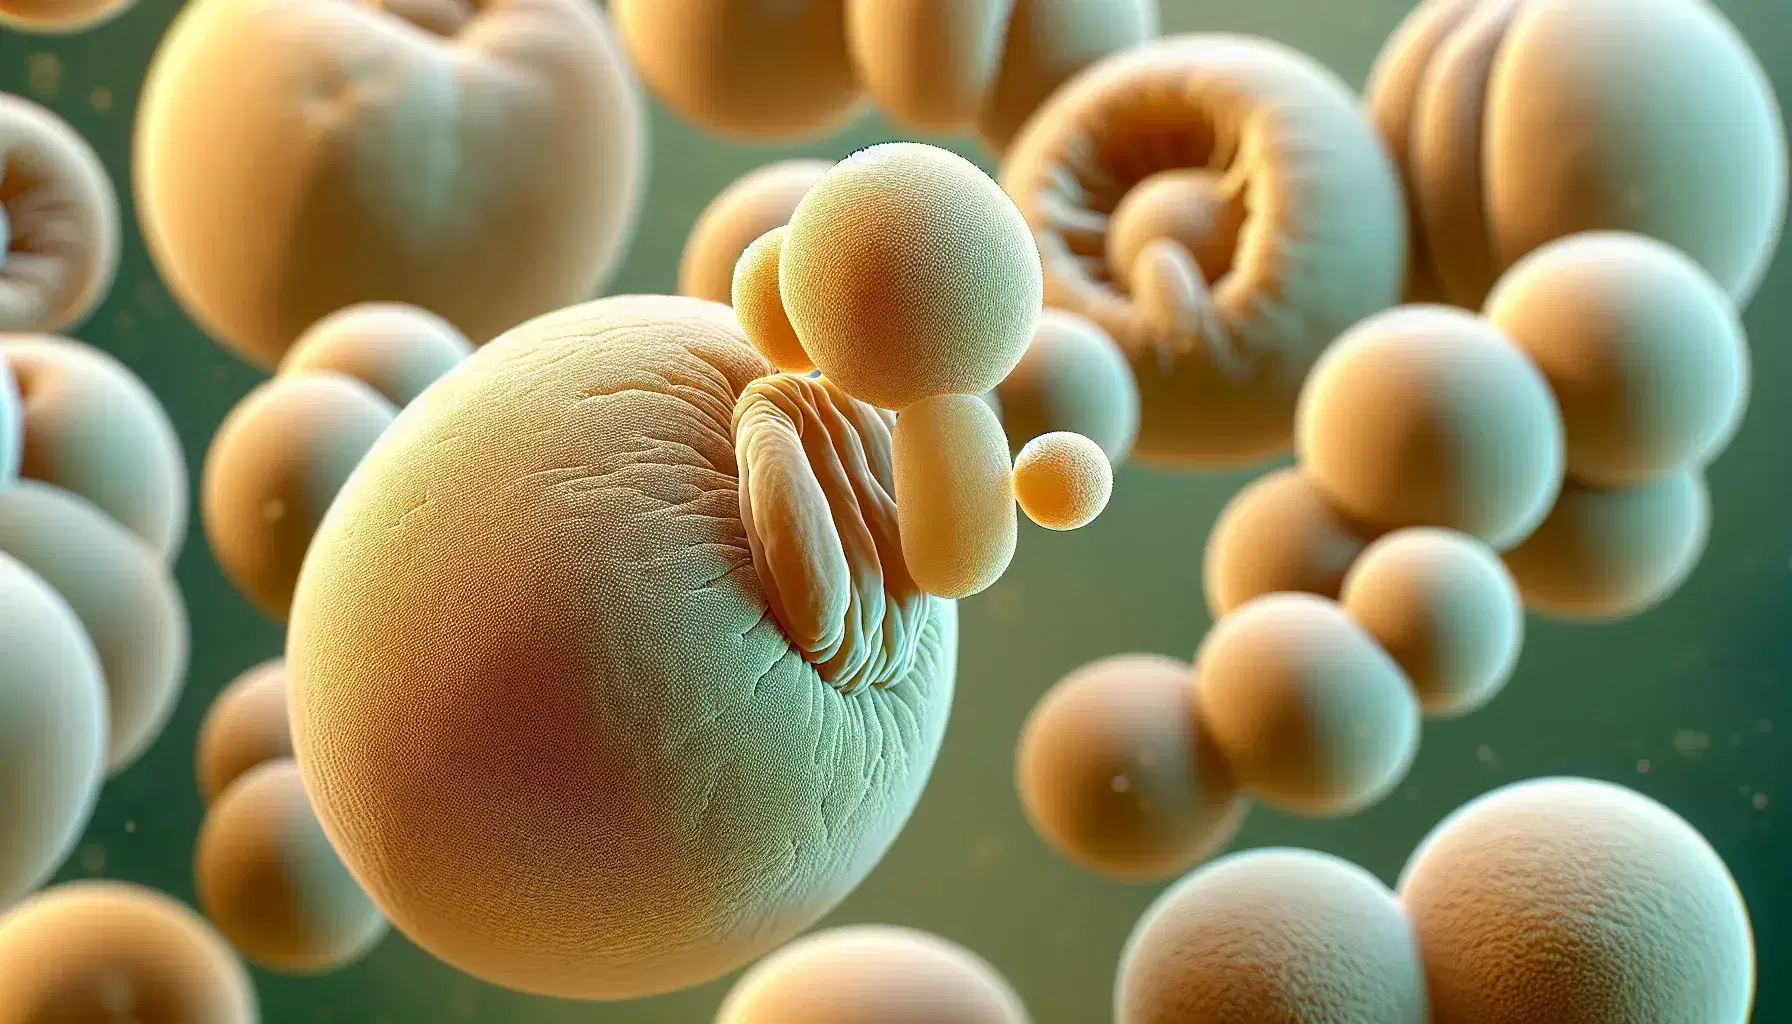 Close-up view of yeast cells in various budding stages, with a prominent cell and its smaller bud in sharp focus against a blurred background.